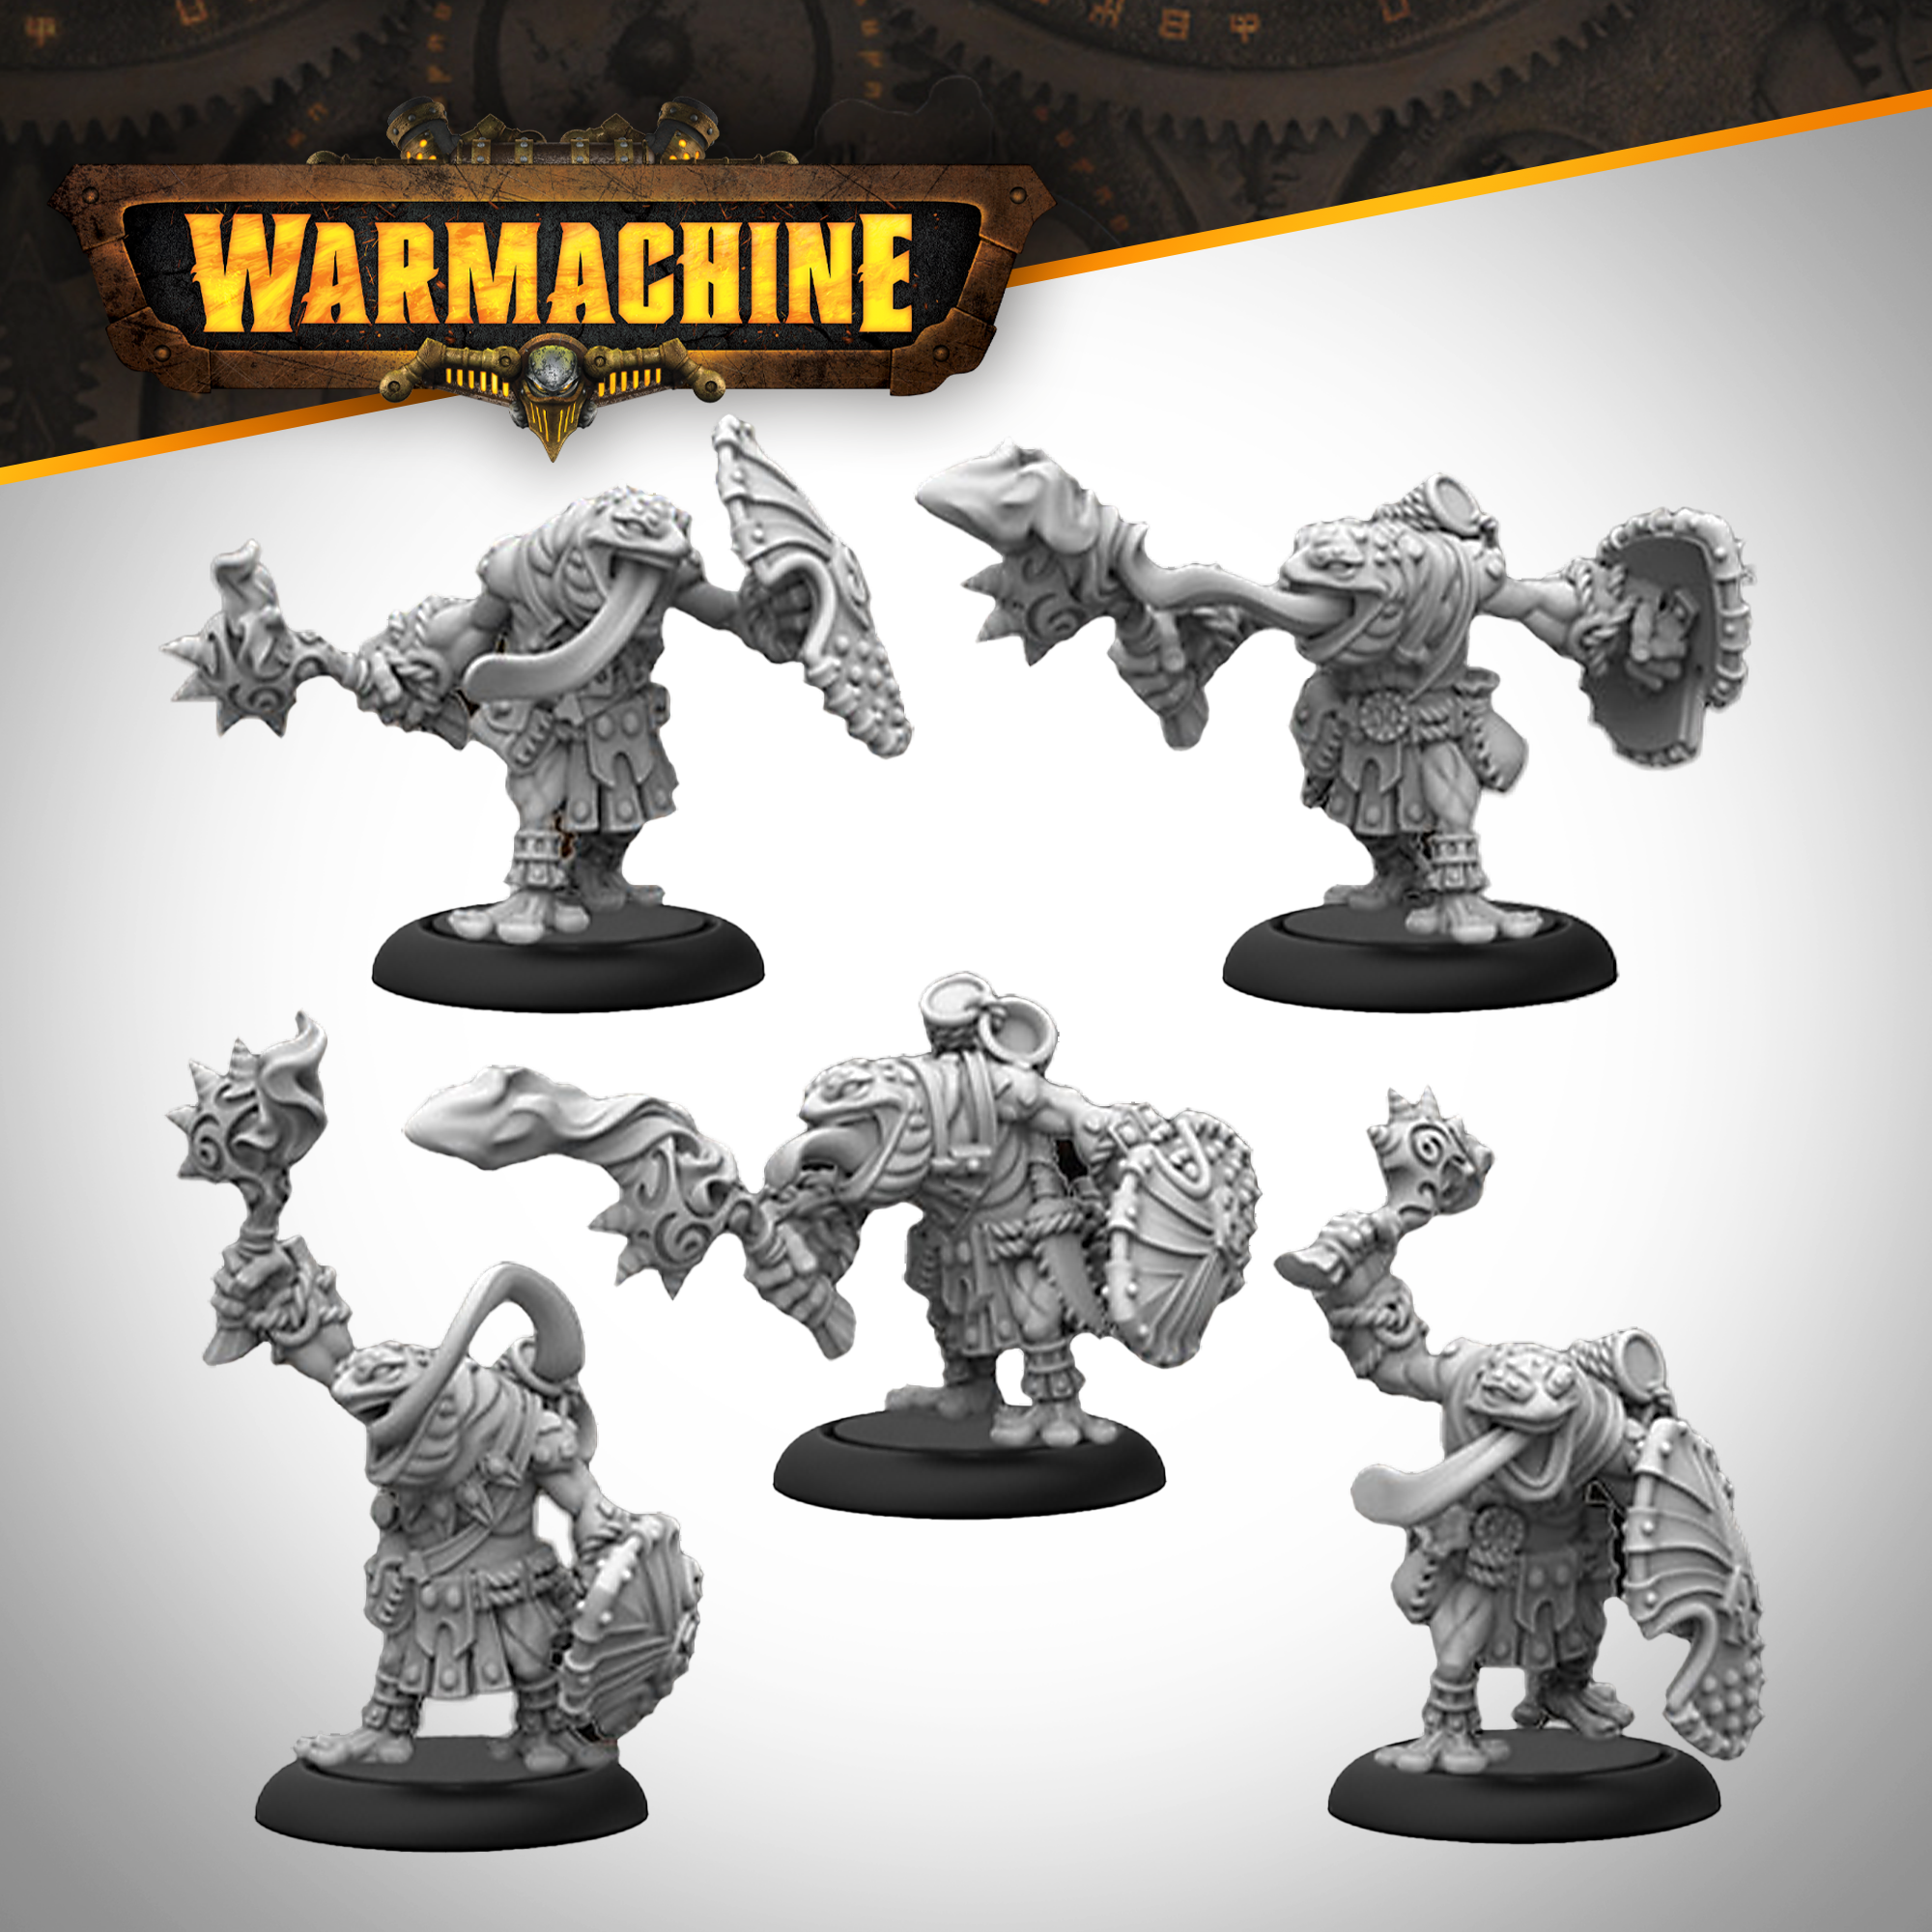 Warmachine: Fire Spitters